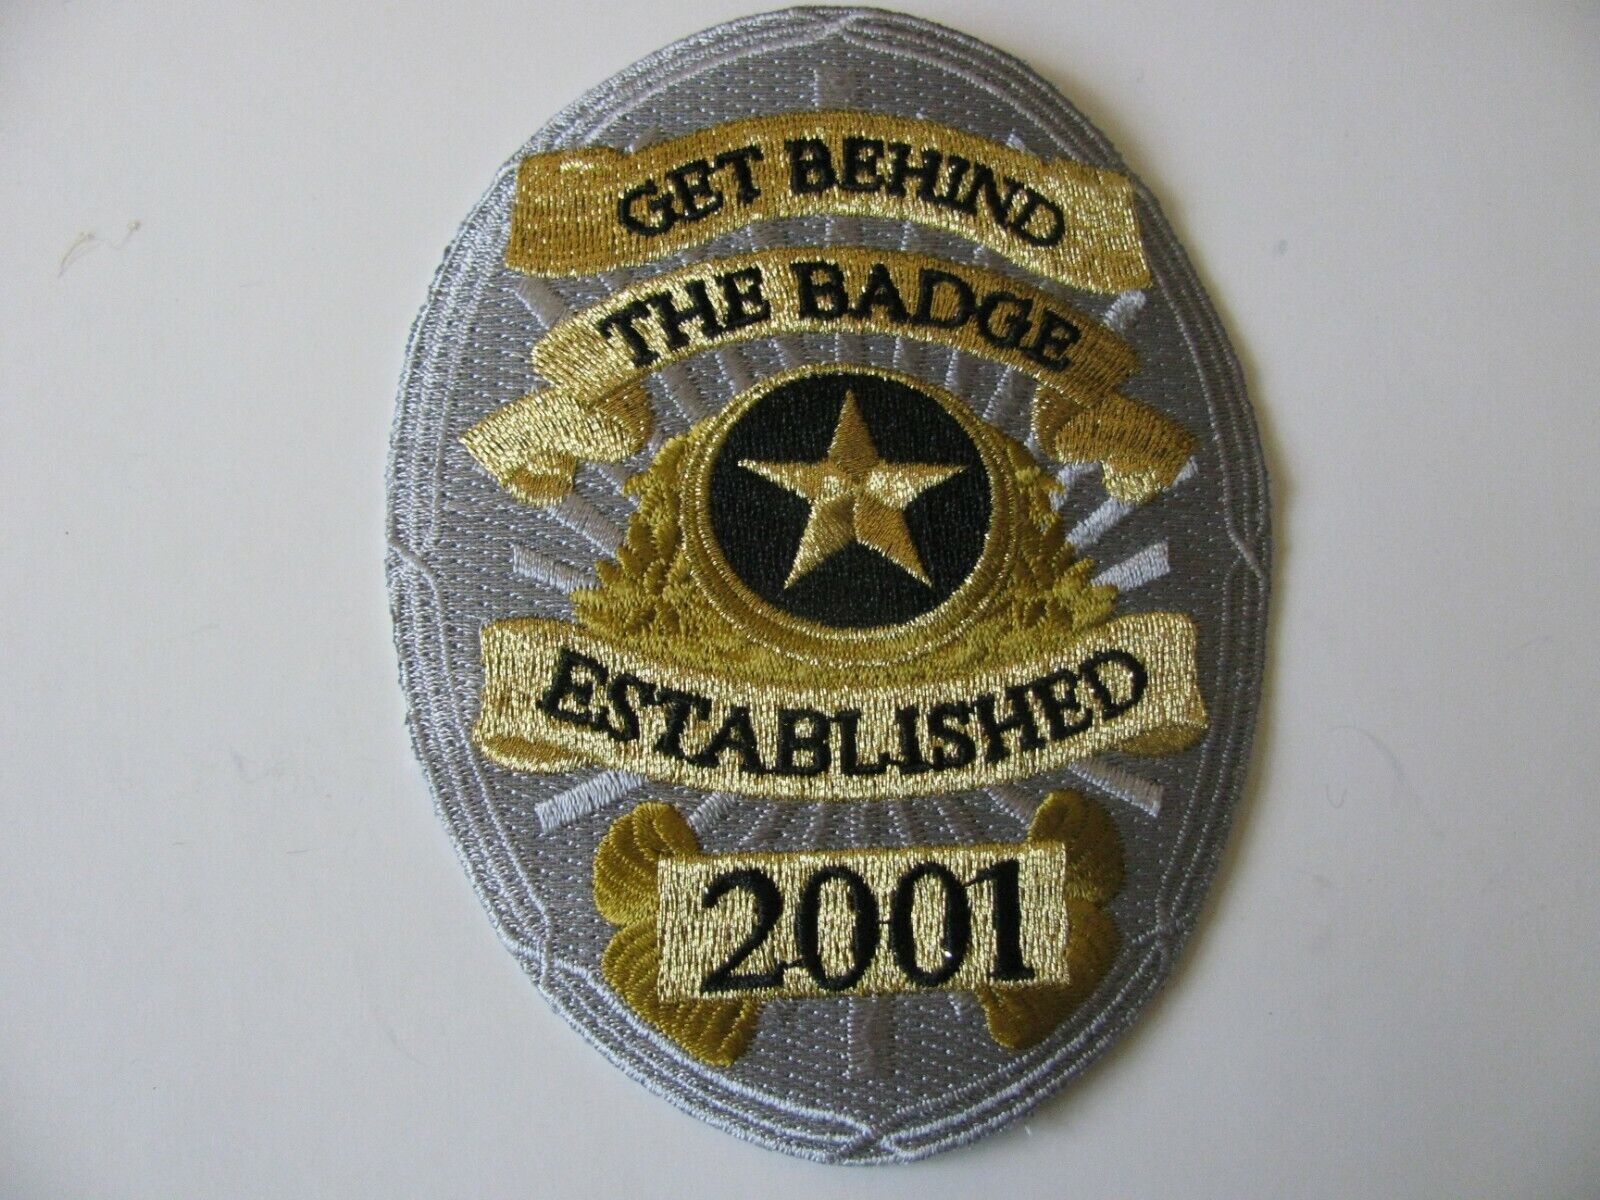 Get Behind The Badge 2001 Police Dept  Patch  Iron On or Sew On  3.75” Rare Logo